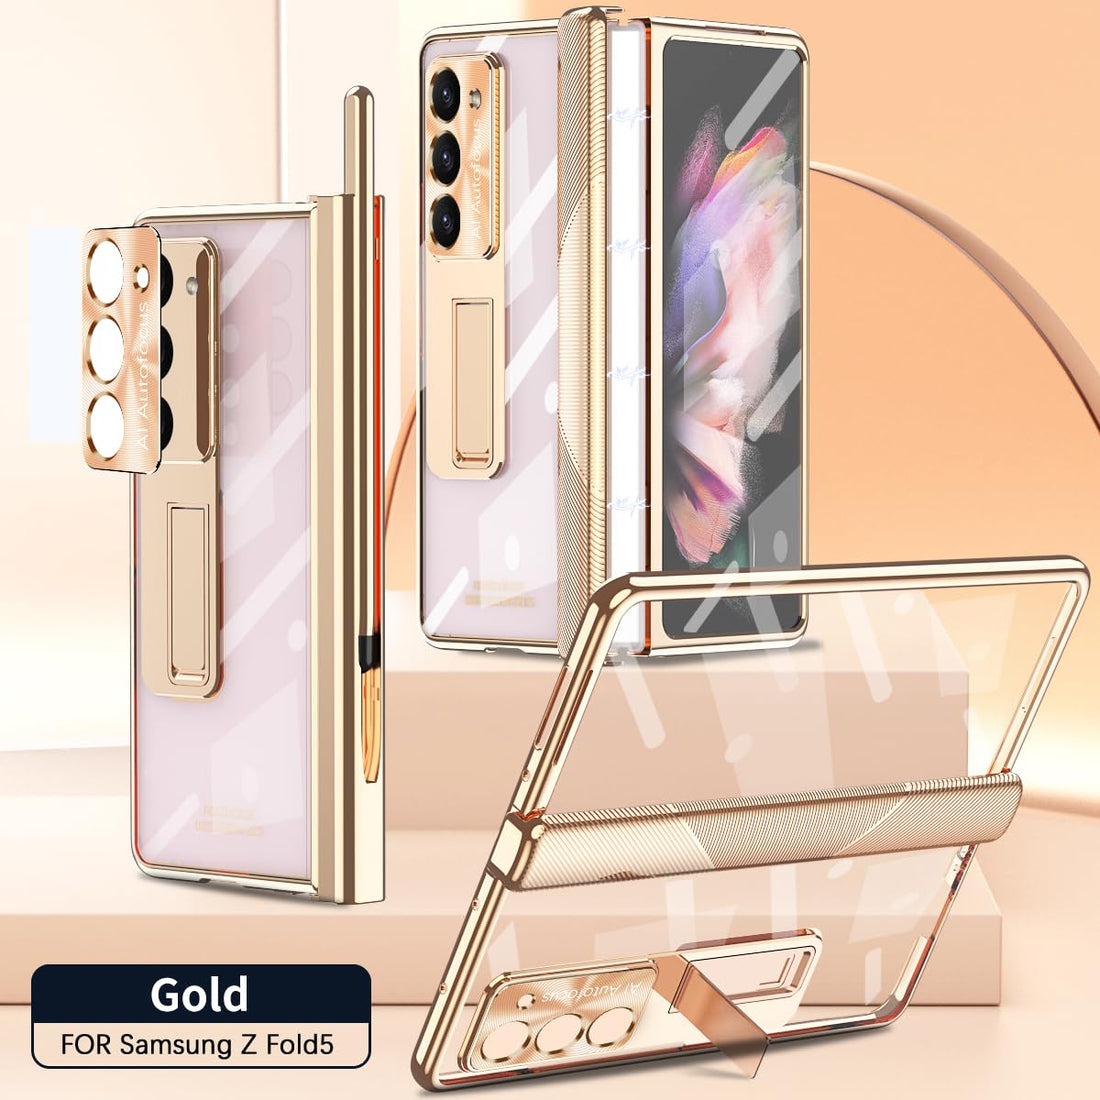 PUROOM for Samsung Galaxy Z Fold 5 Hinge Coverage Protective Case Transparent Plating PC with Pen Holder Kickstand Screen Protector All-Inclusive Case (Gold)